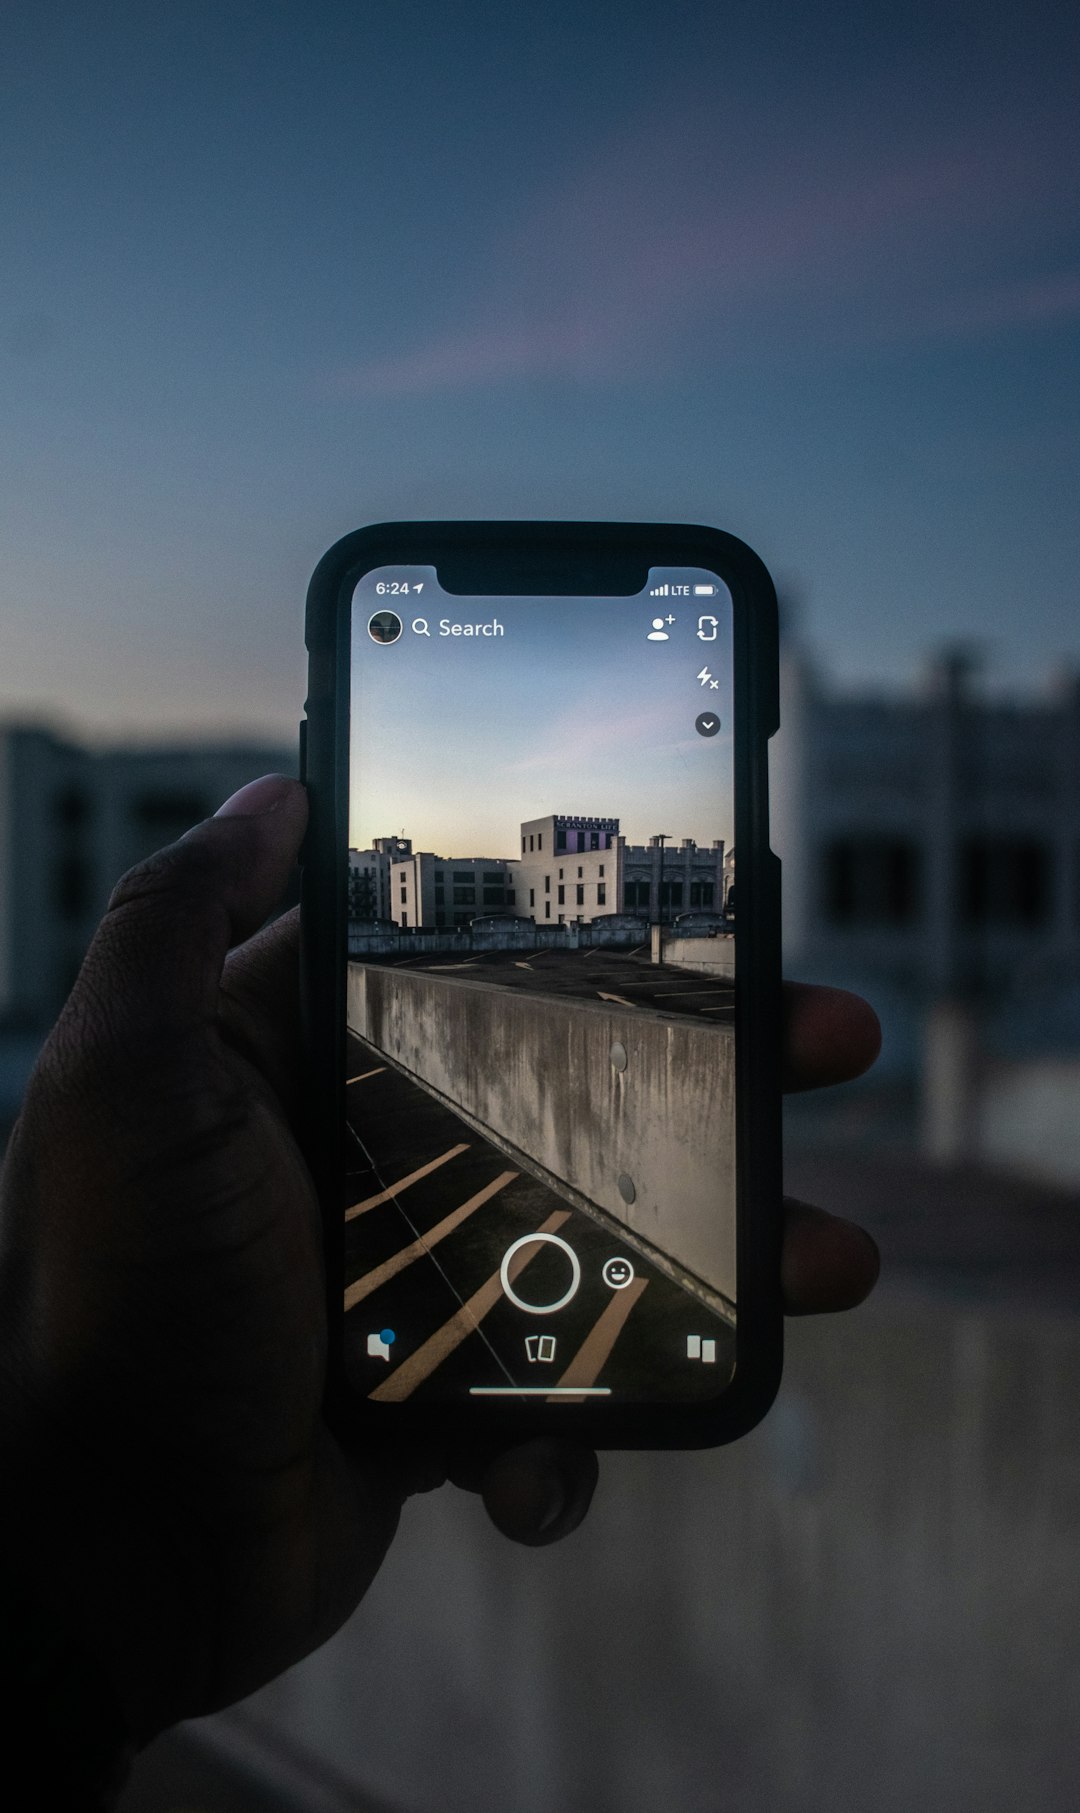 smartphone camera displaying building roof during day